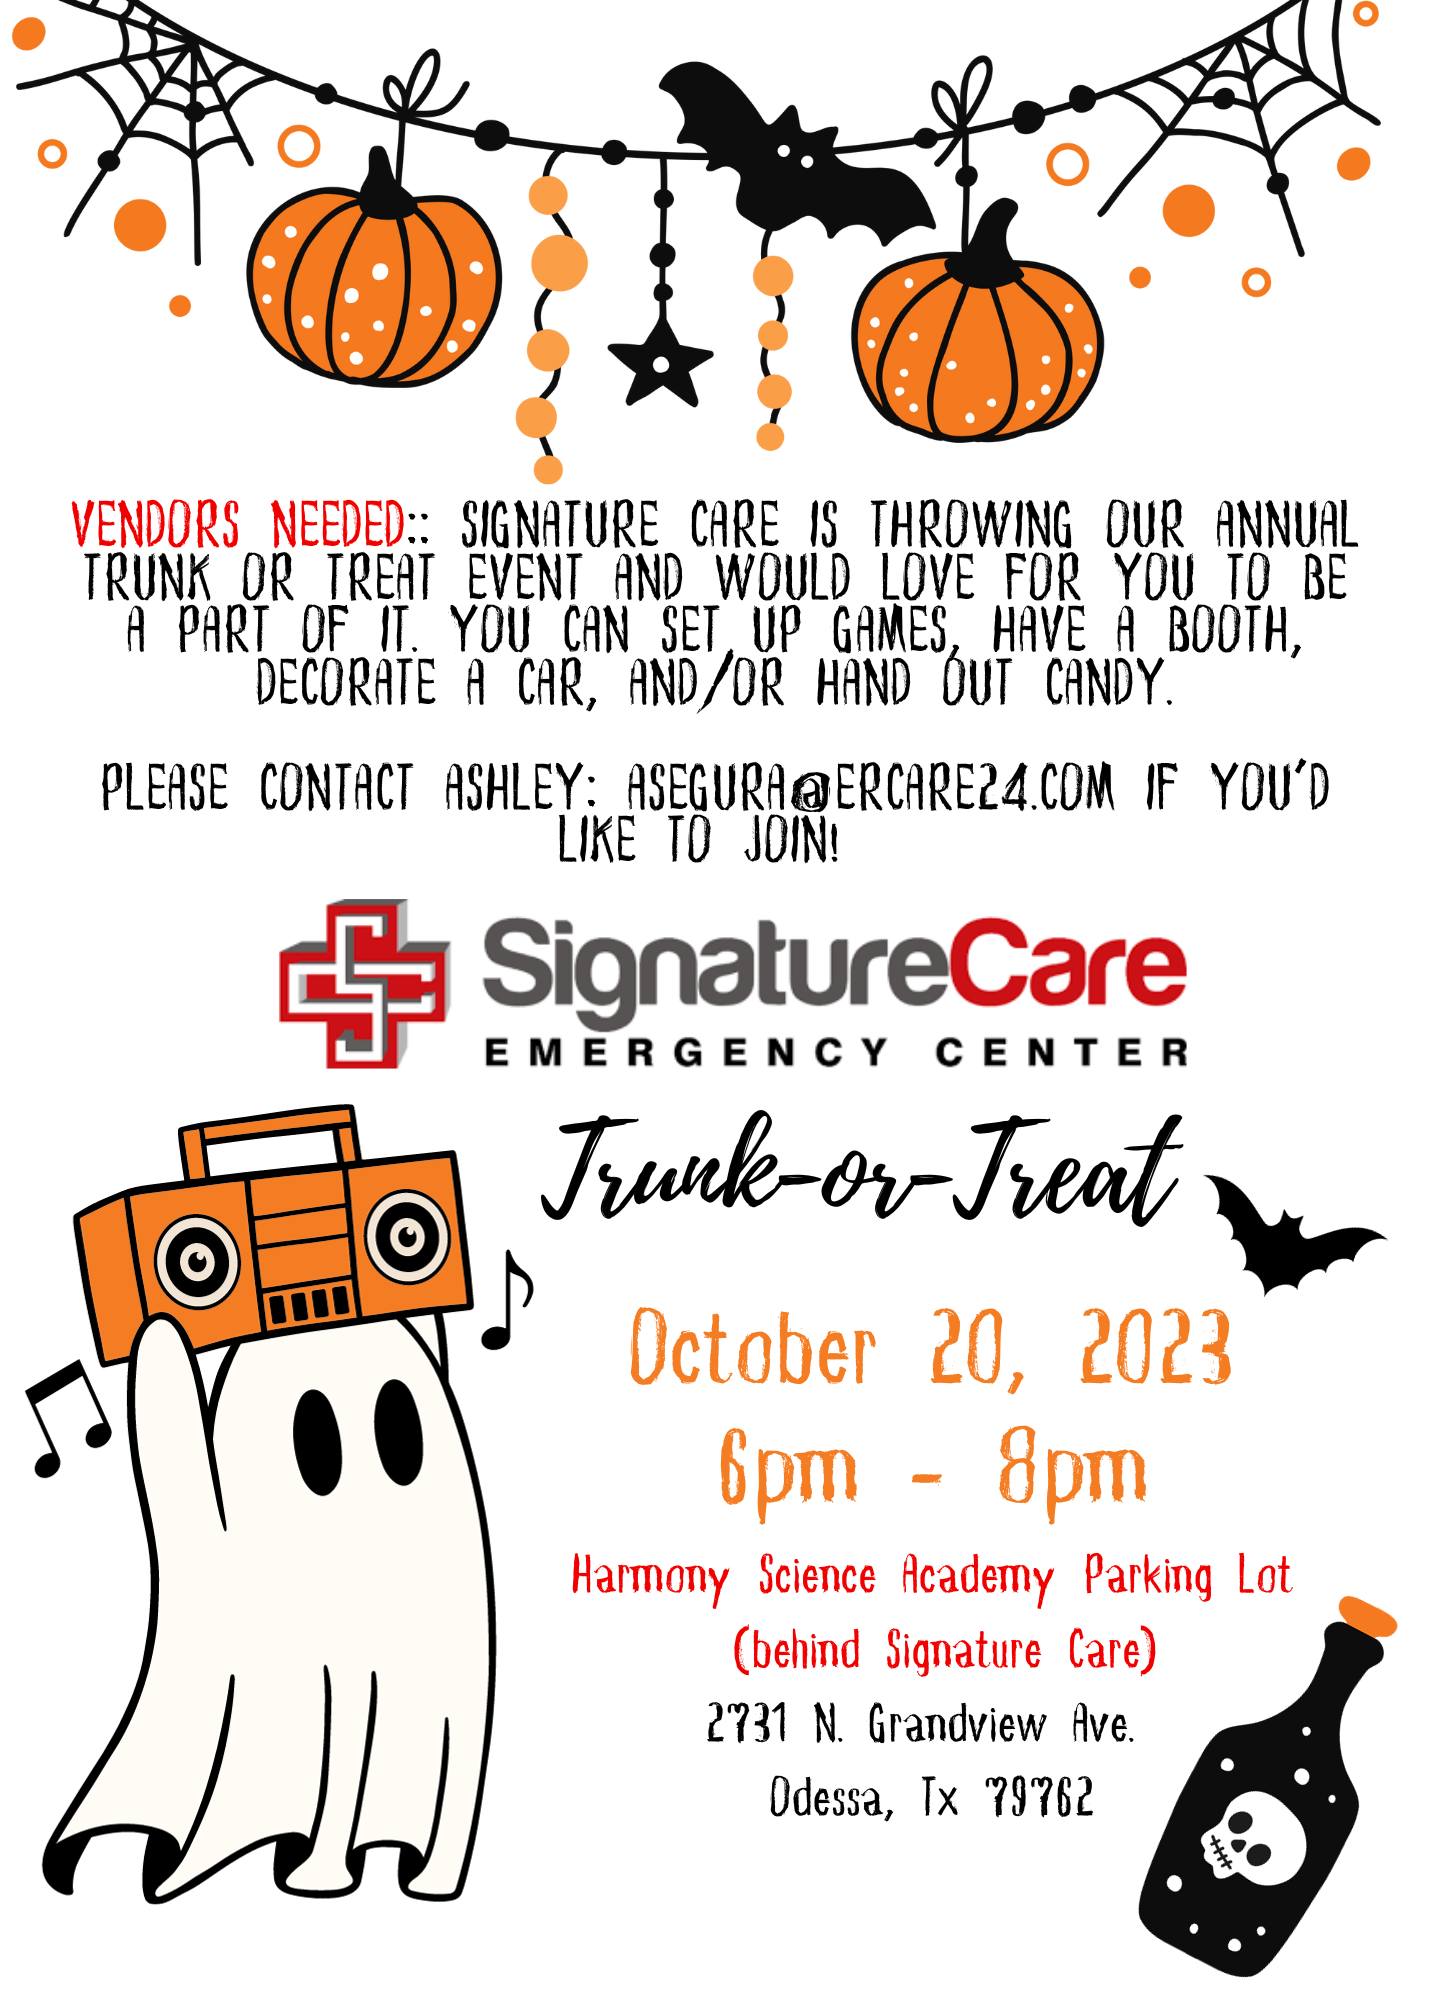 Trunk or Treat at Harmony Science Academy Parking Lot on October 20, 2023 with Signature Care